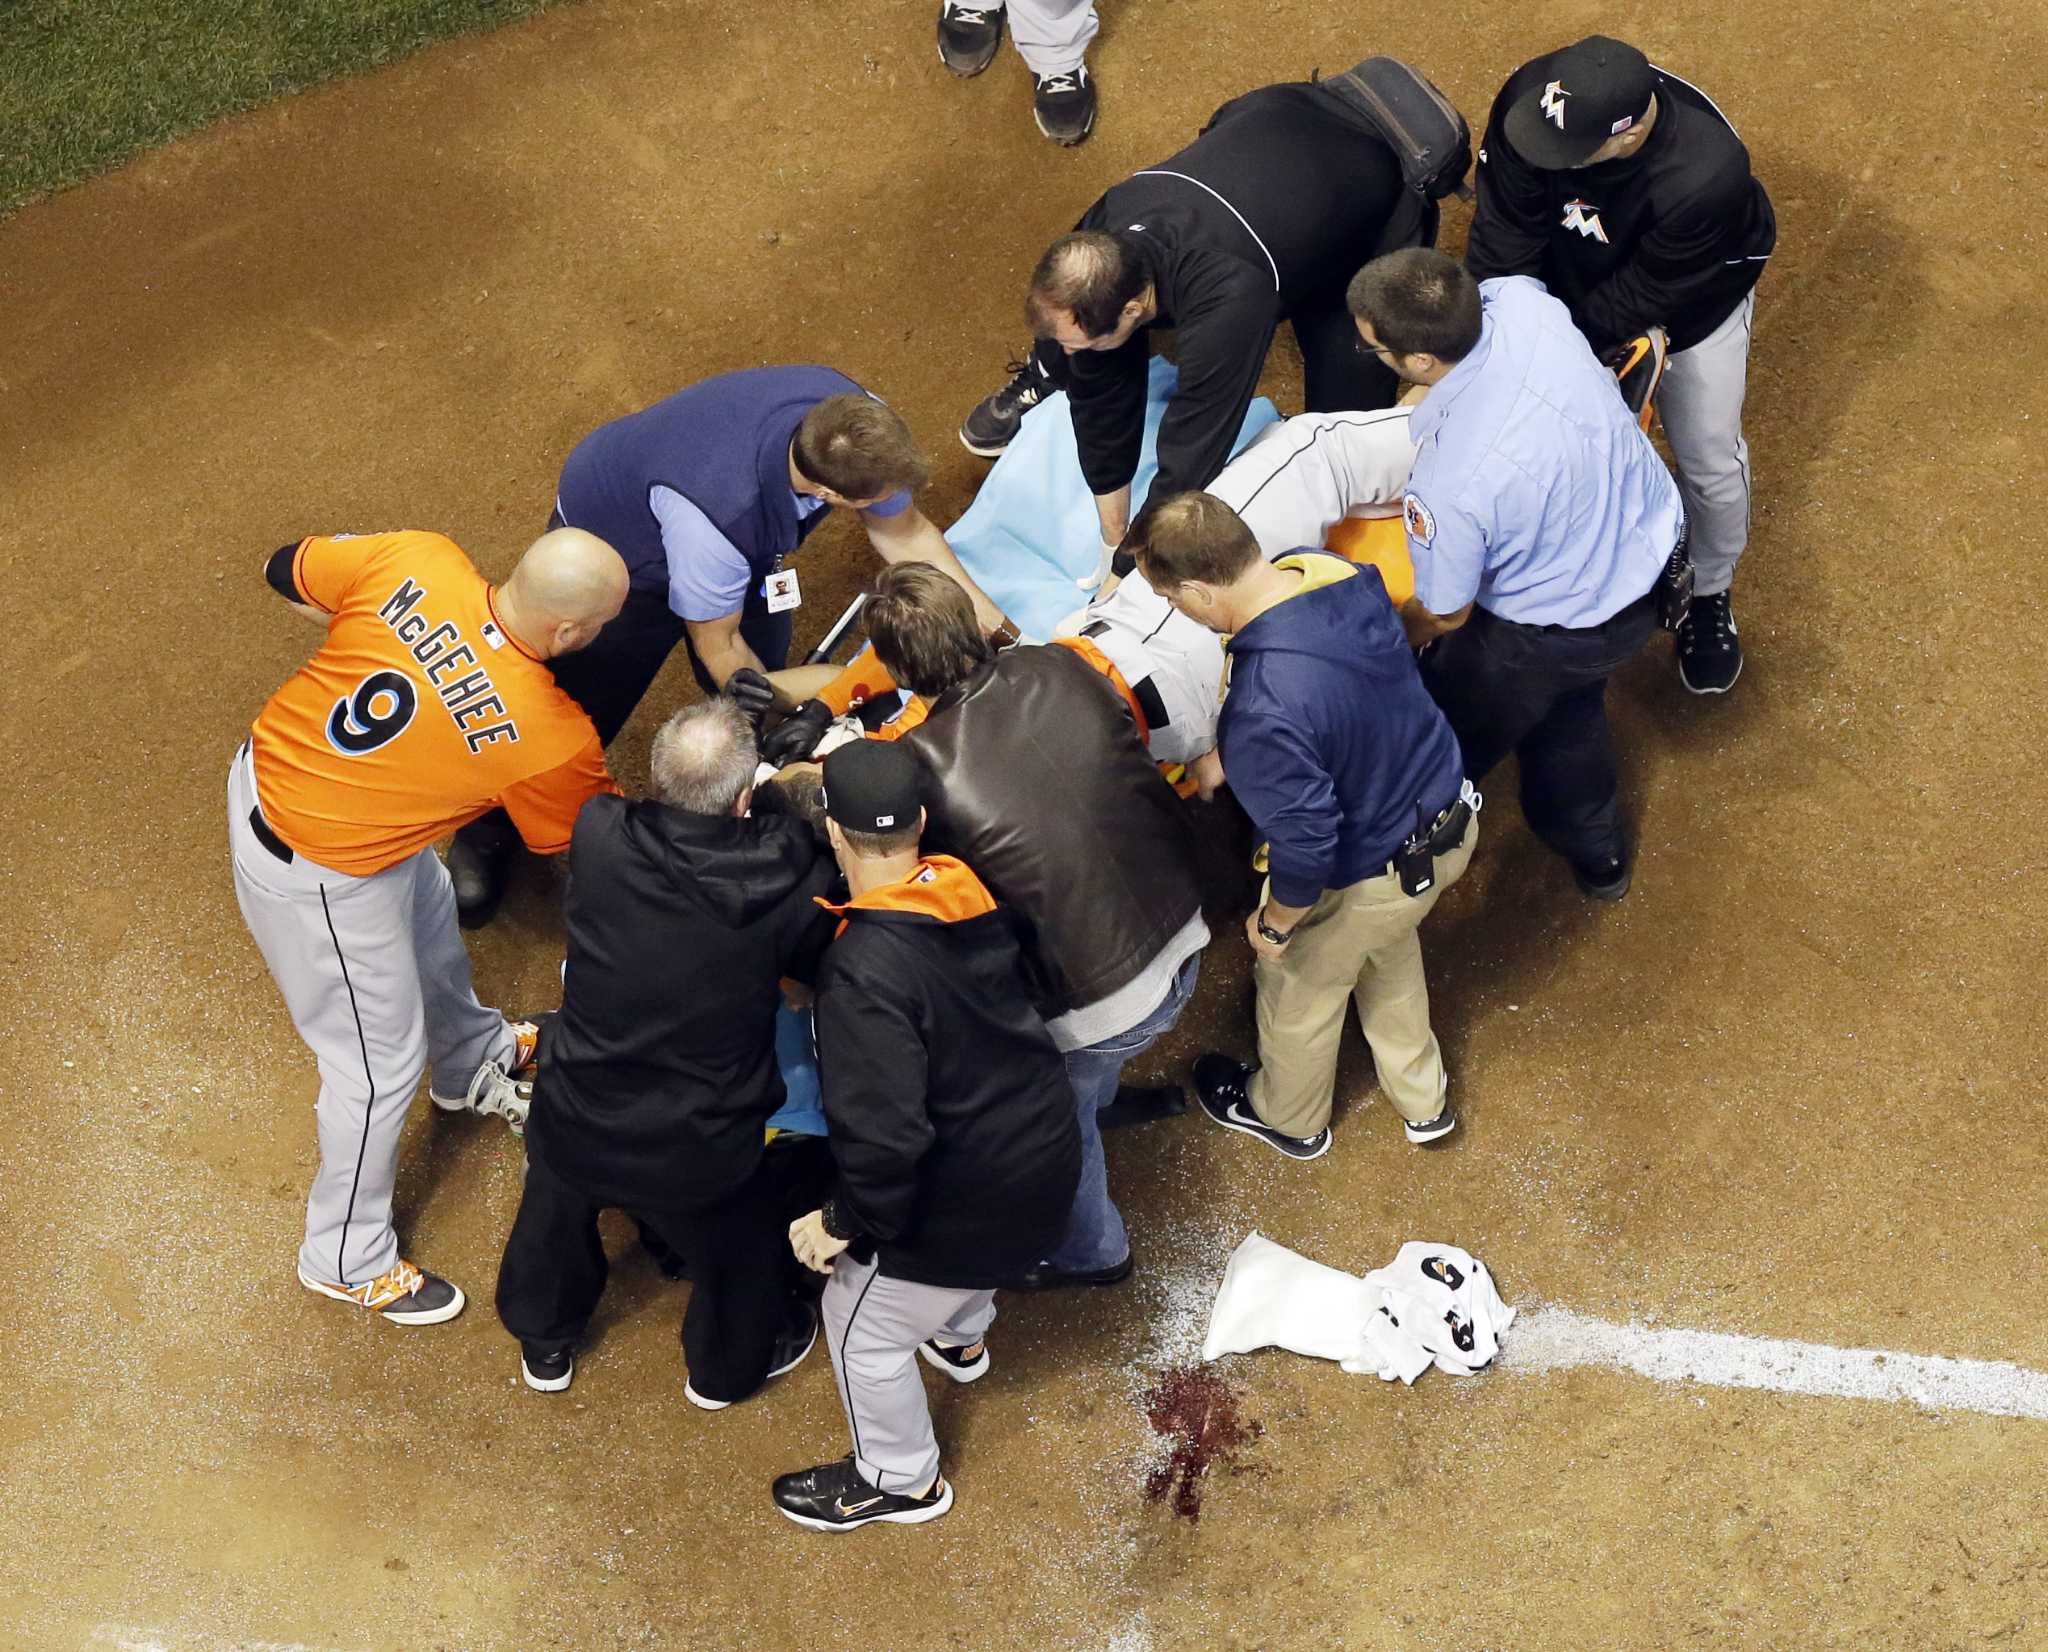 Hit by Pitch, the Miami Marlins' Giancarlo Stanton Is Taken to